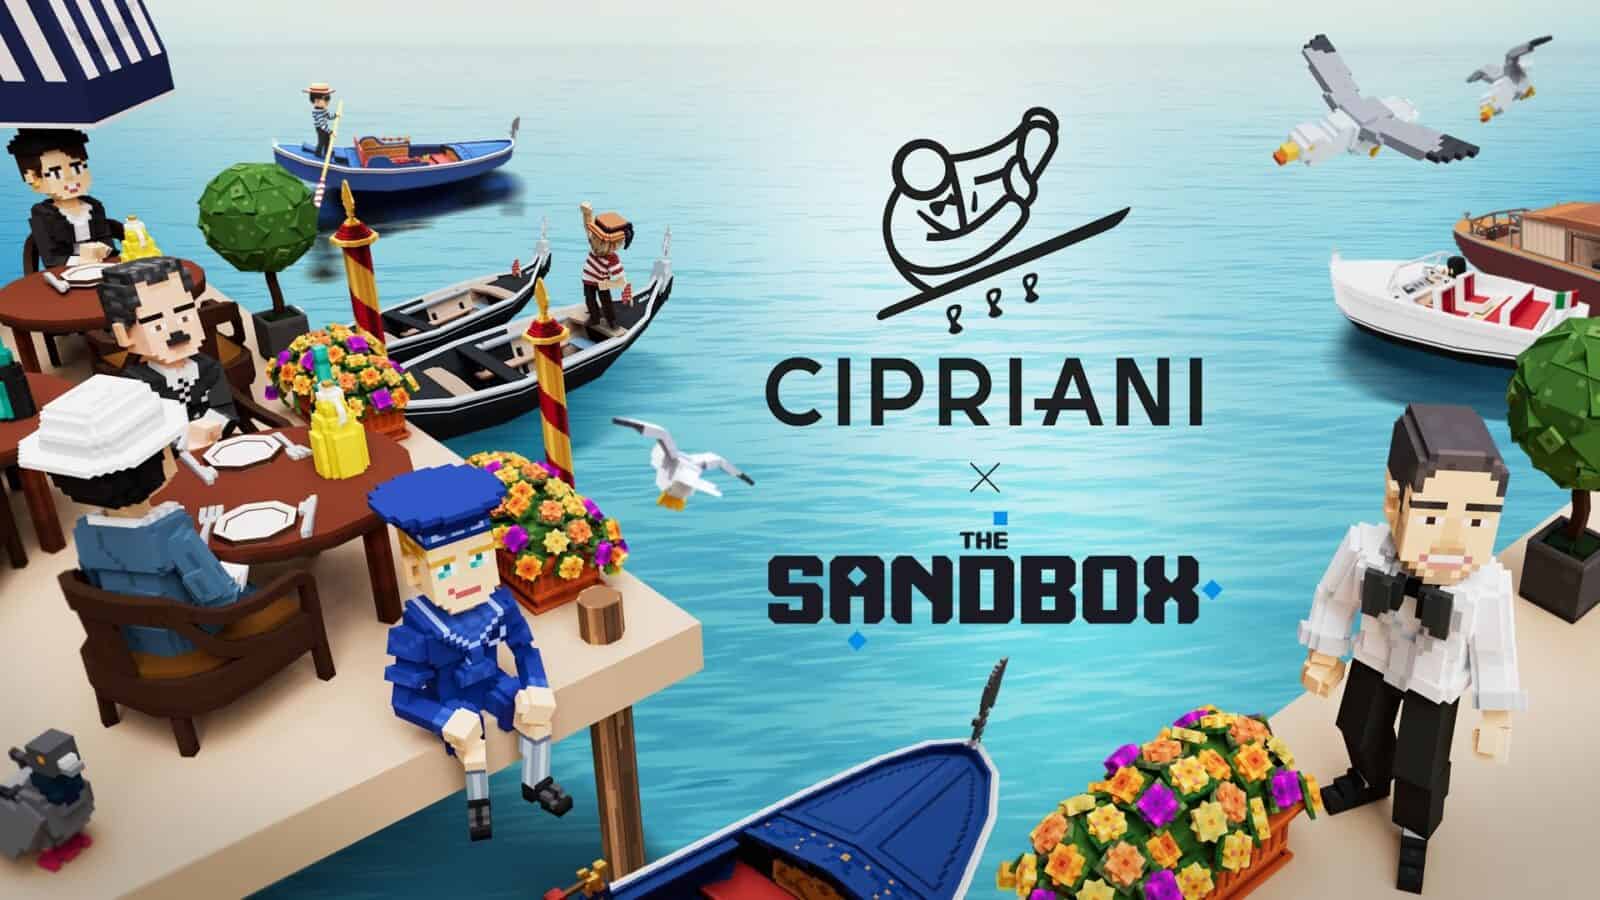 the sandbox and cipriani unveil luxury italian metaverse experience The Sandbox, a leading player in the metaverse industry, and Cipriani, a historic hospitality titan, have unveiled their collaboration to manifest Italy's opulent lifestyle in the metaverse.